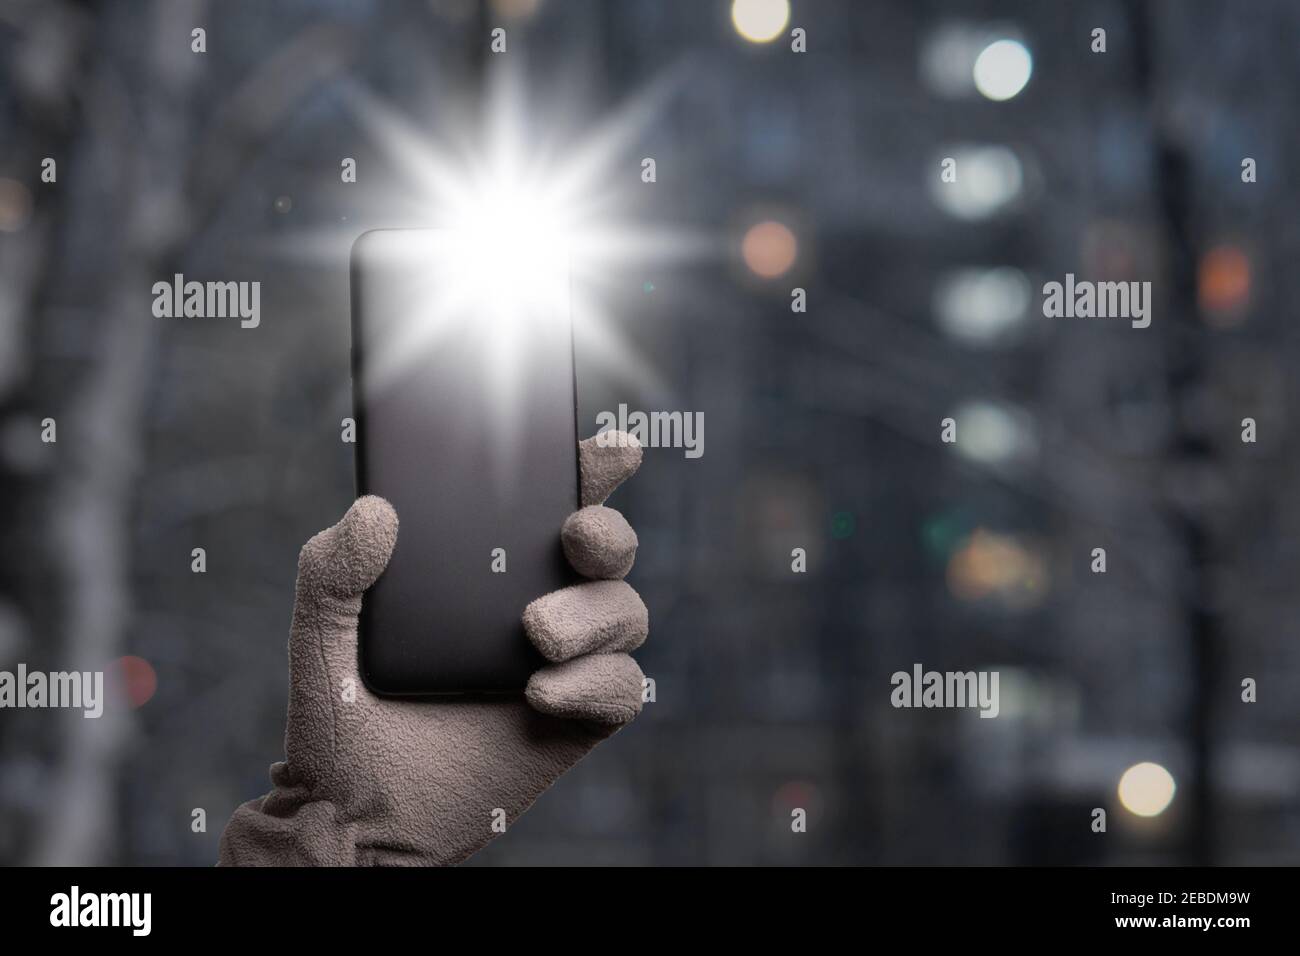 Illustration for a future action of lighting flashlights of smartphones in support of leader of russian opposition Alexey Navalny in the courtyards of Stock Photo